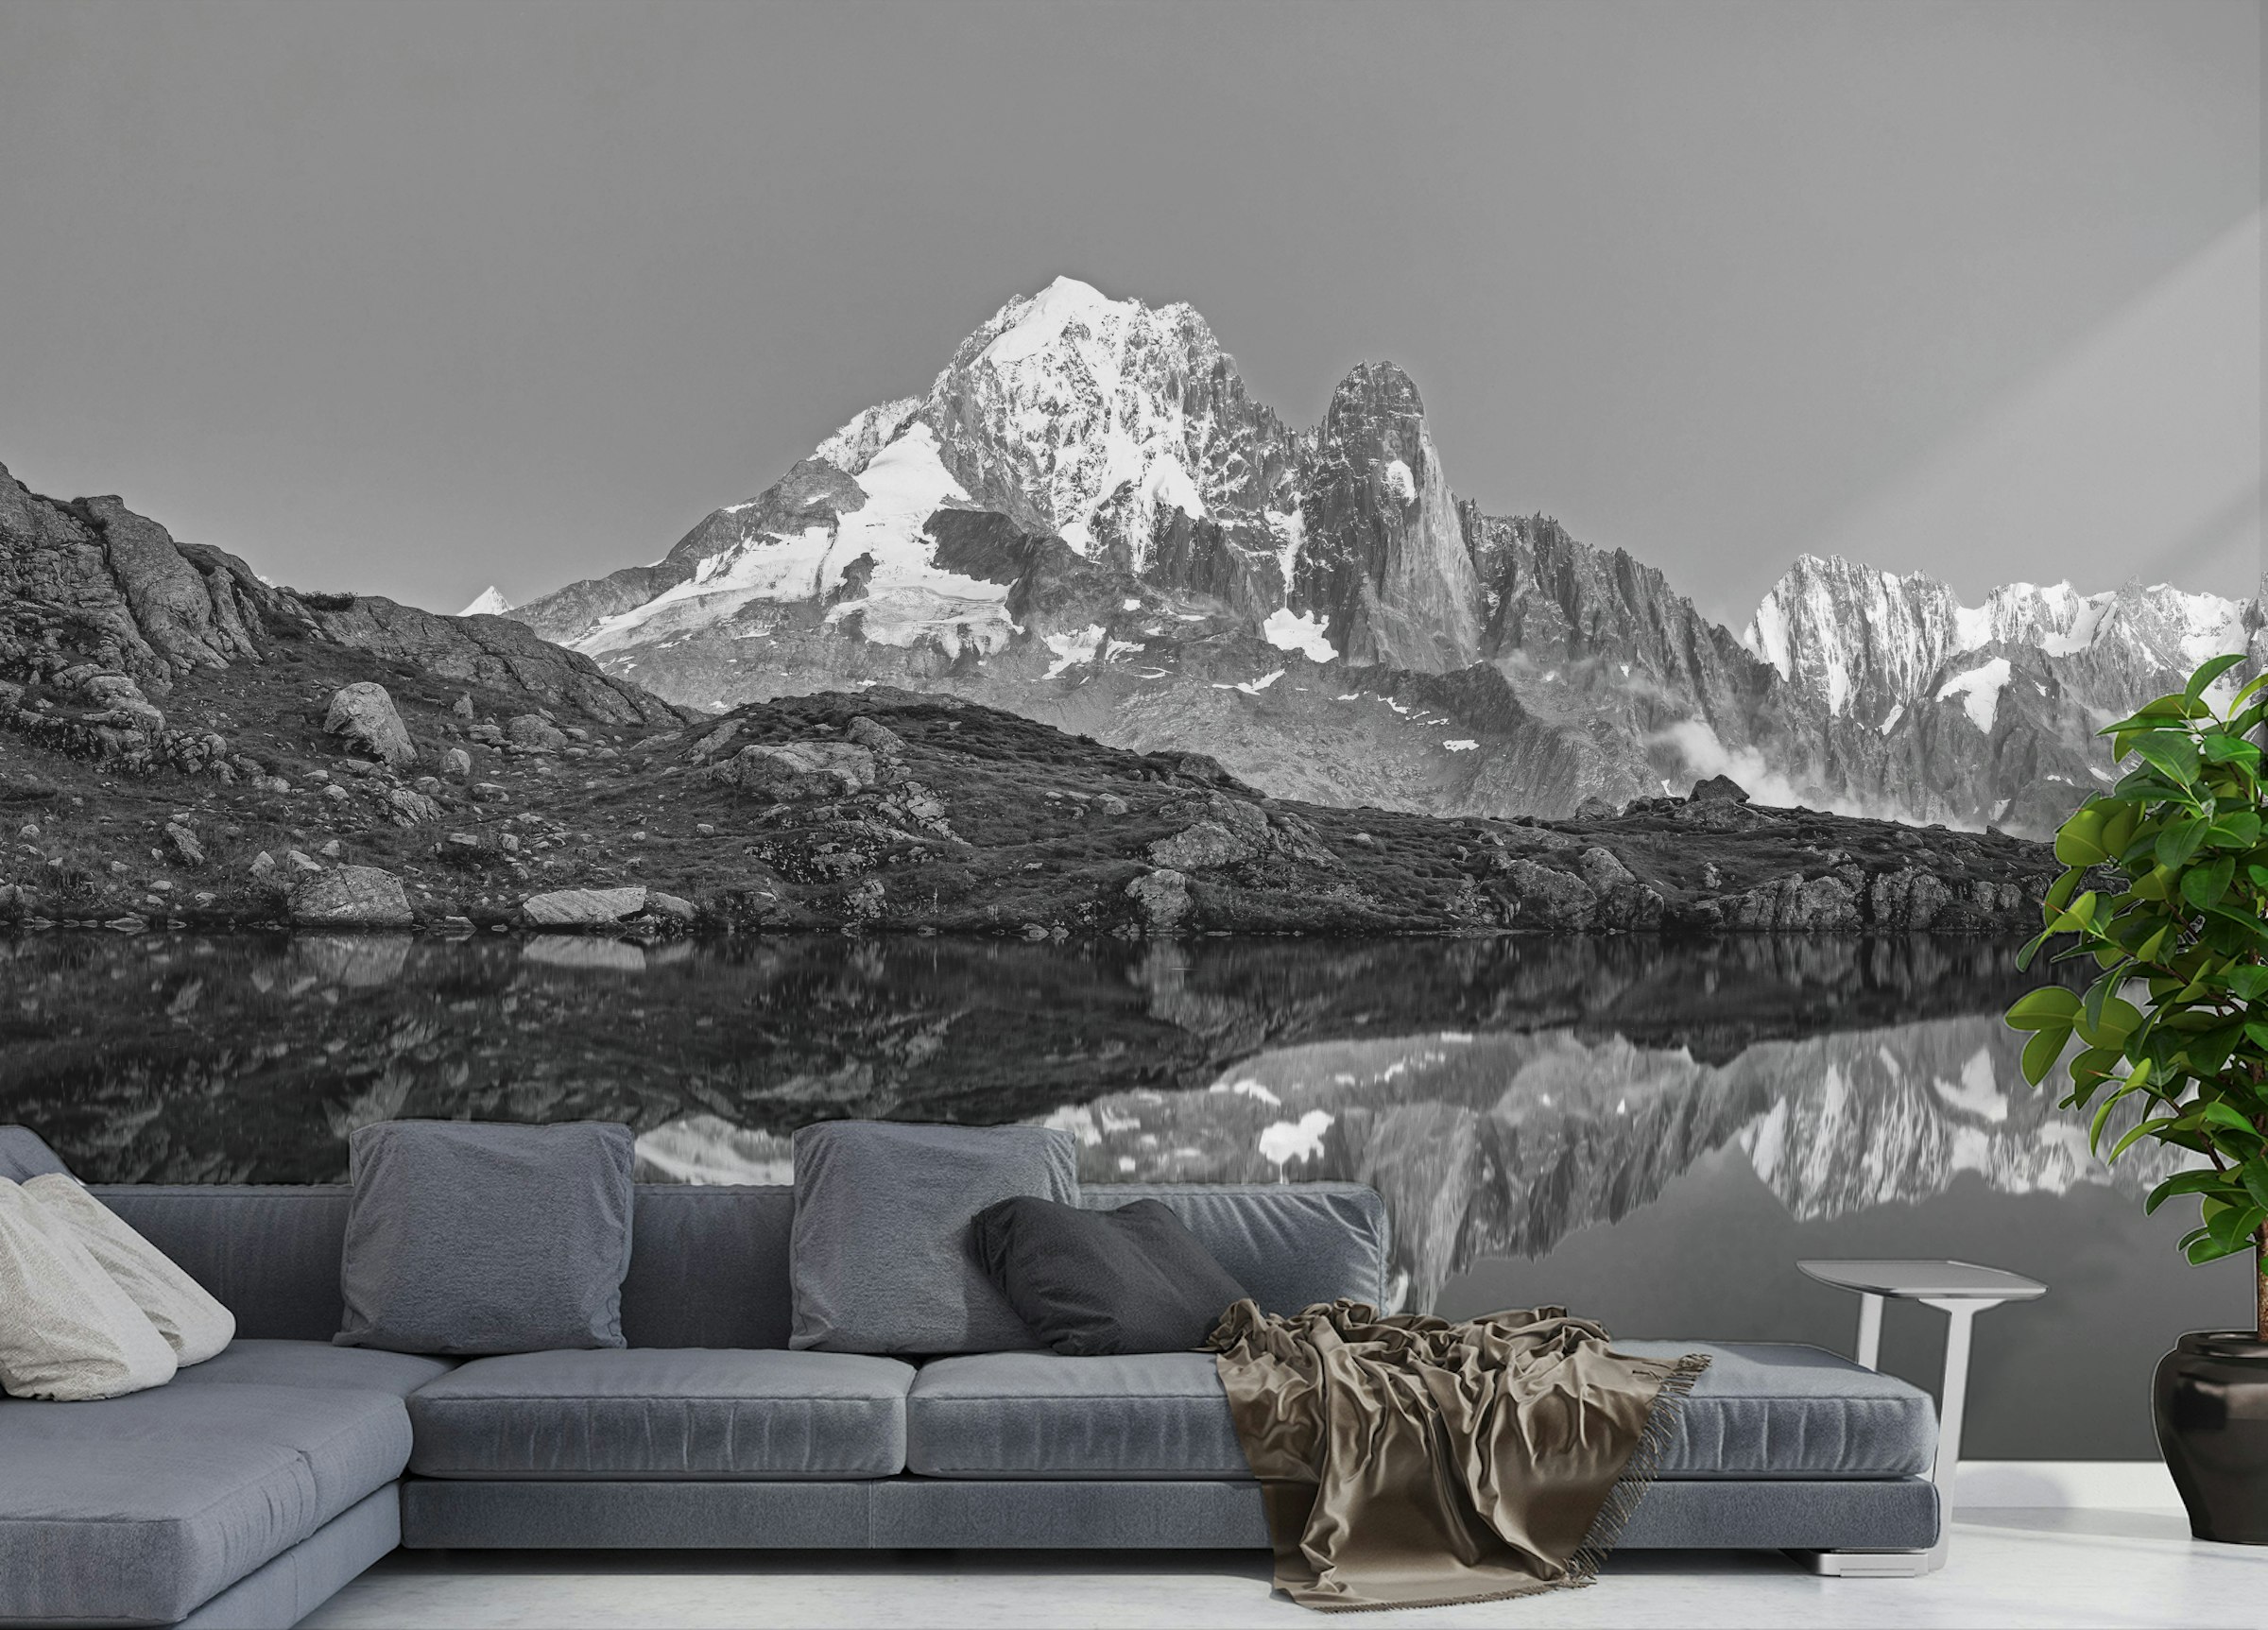 Custom made Misty Mountain Tranquility Wall Murals